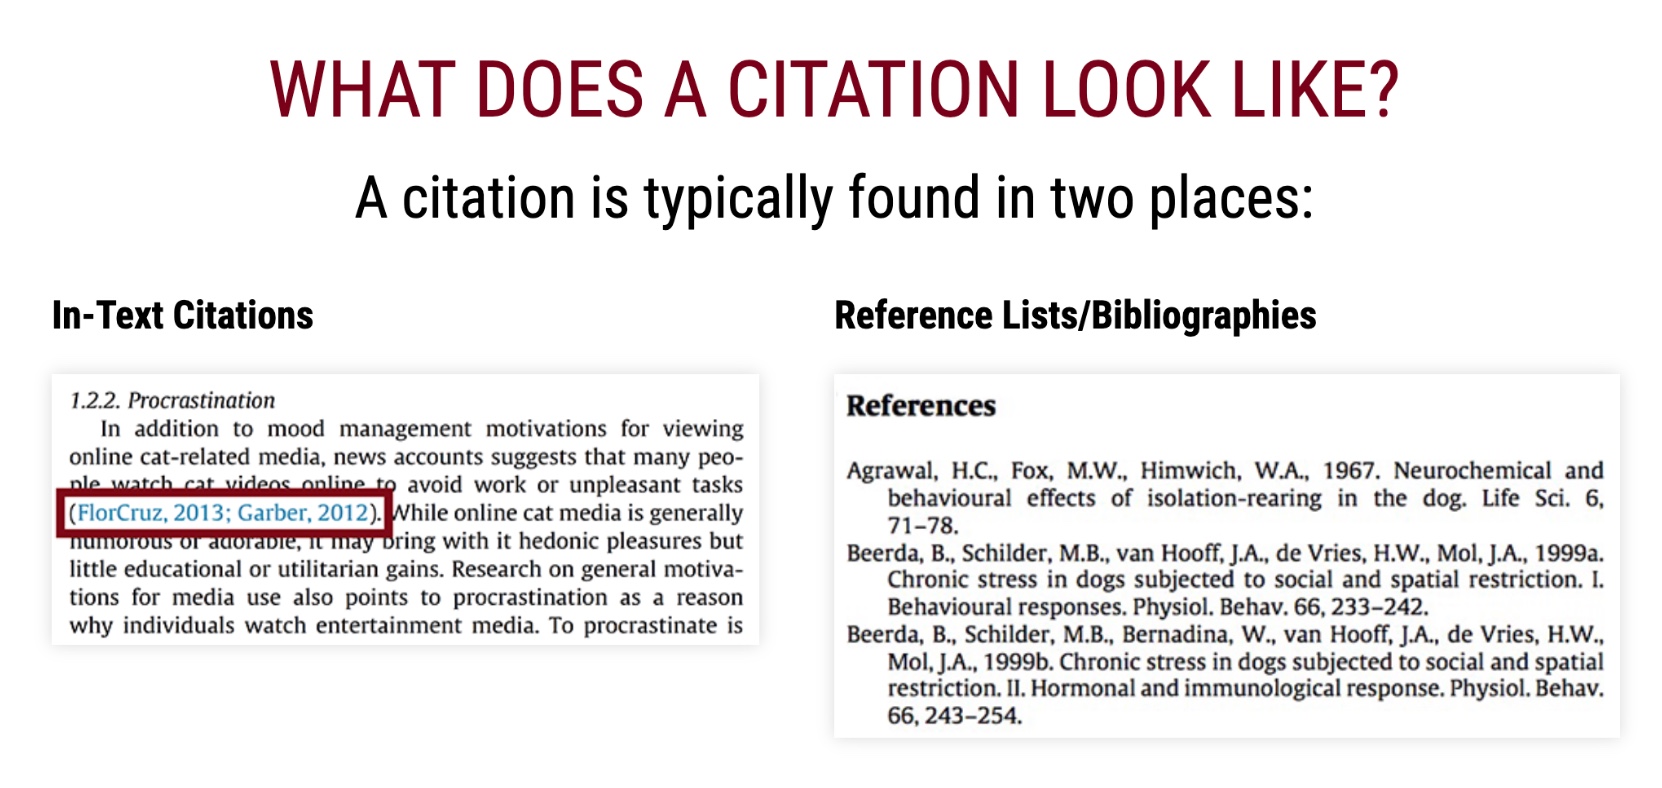 Citations include an in-text citation and a citation in the bibliography.